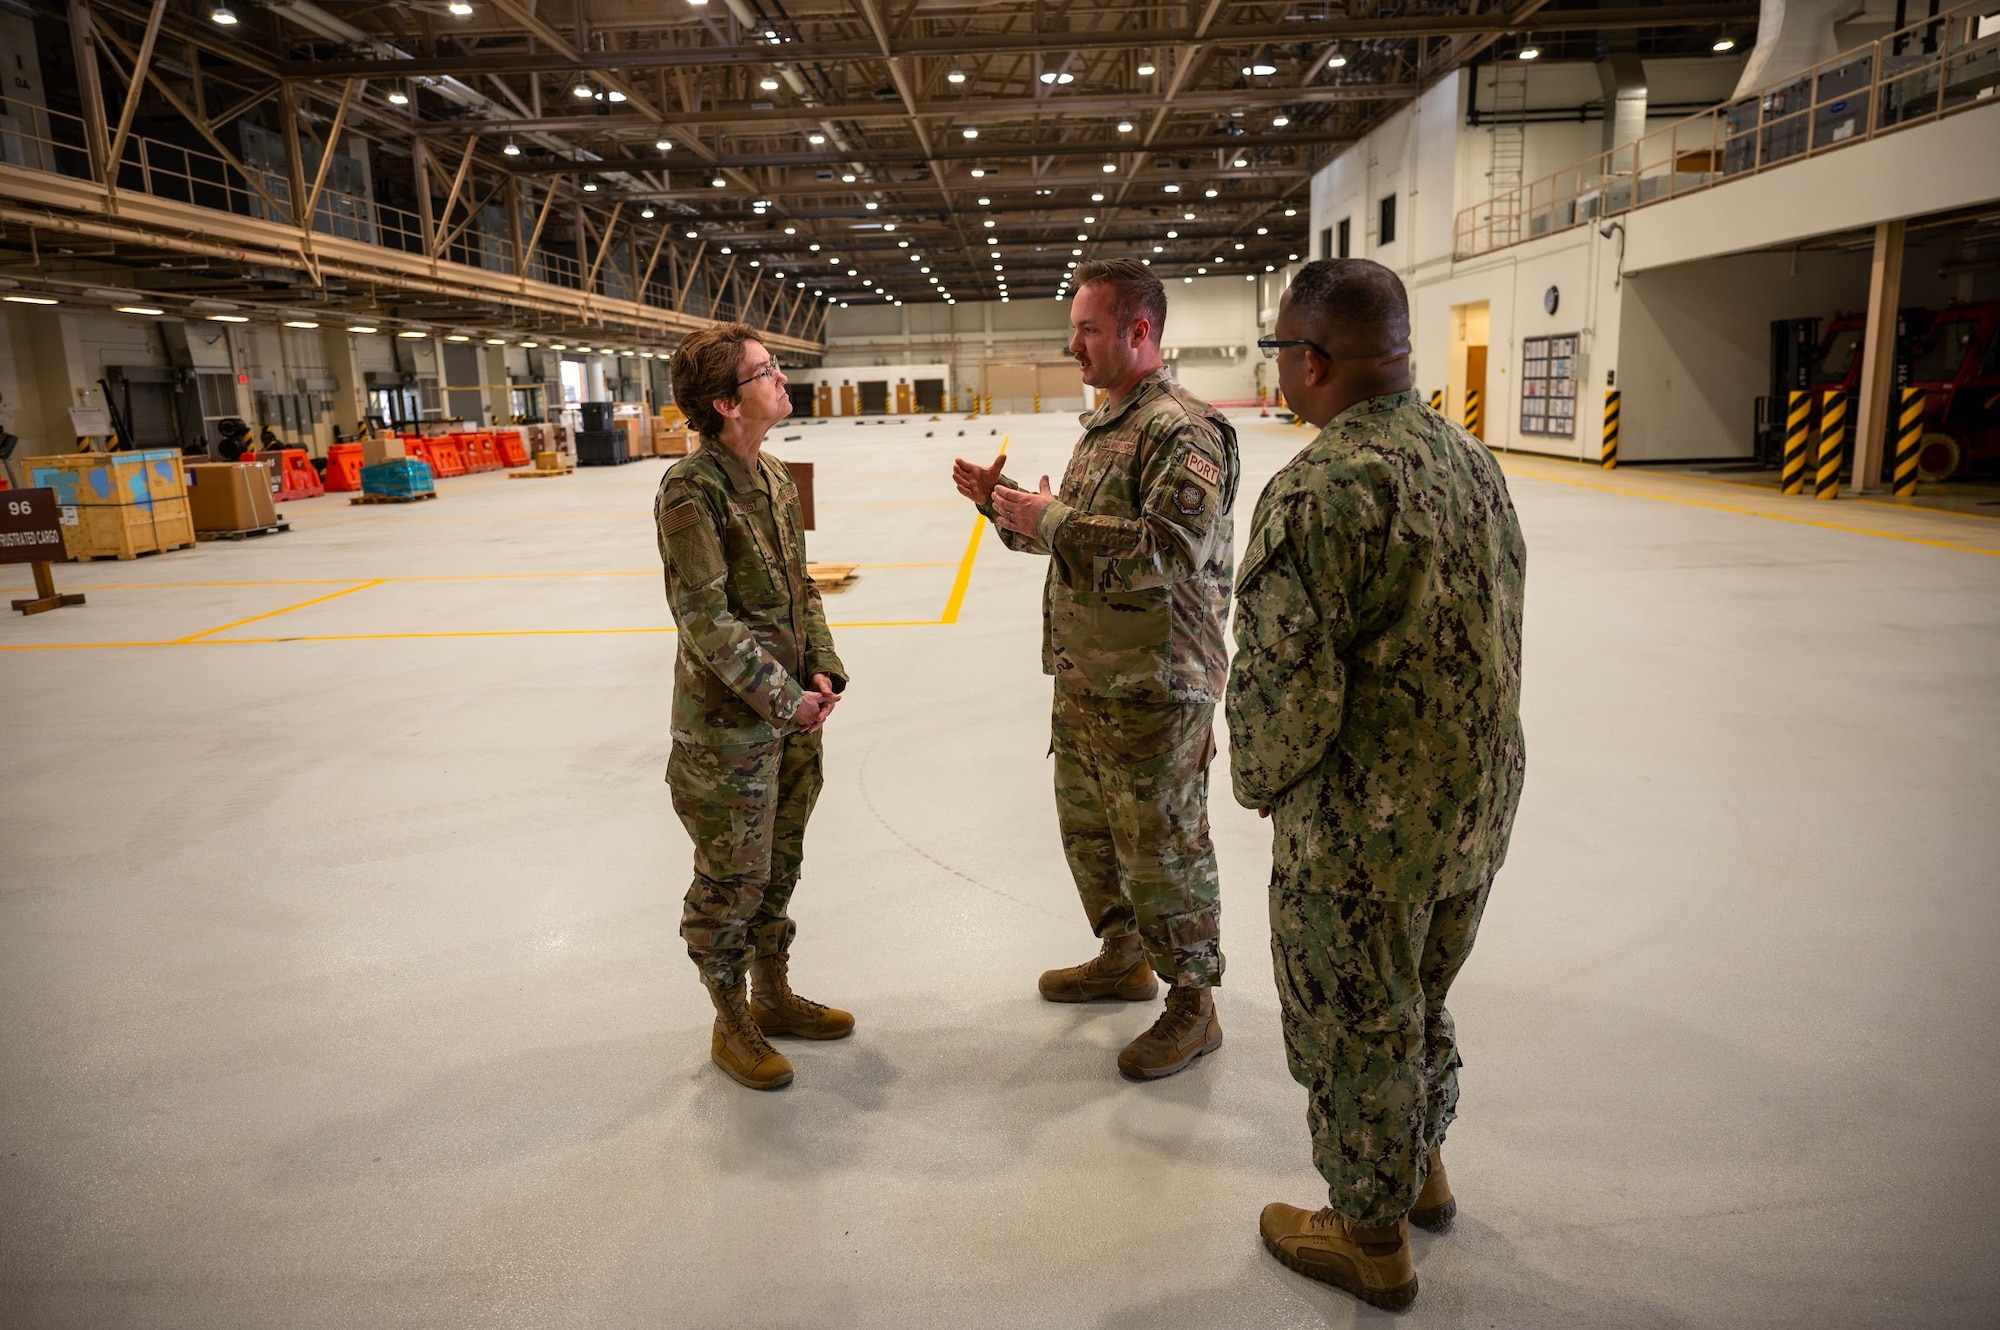 U.S. Air Force Master Sgt. Michael Perry, 731st Air Mobility Squadron, briefs U.S. Air Force Gen. Jacqueline D. Van Ovost, commander, U.S. Transportation Command (USTRANSCOM), and U.S. Navy Fleet Master Chief Donald Myrick, senior enlisted leader, USTRANSCOM, May 17, 2022, on Osan Air Base, Republic of Korea. The 731st AMS is responsible for ensuring the safety and fluid movement of all traveling personnel in and outbound via weekly rotators, tracking passenger manifests, handling baggage, and executing security checks and safety briefings for passengers. (U.S. Air Force photo by Tech. Sgt. Zachariah Lopez)